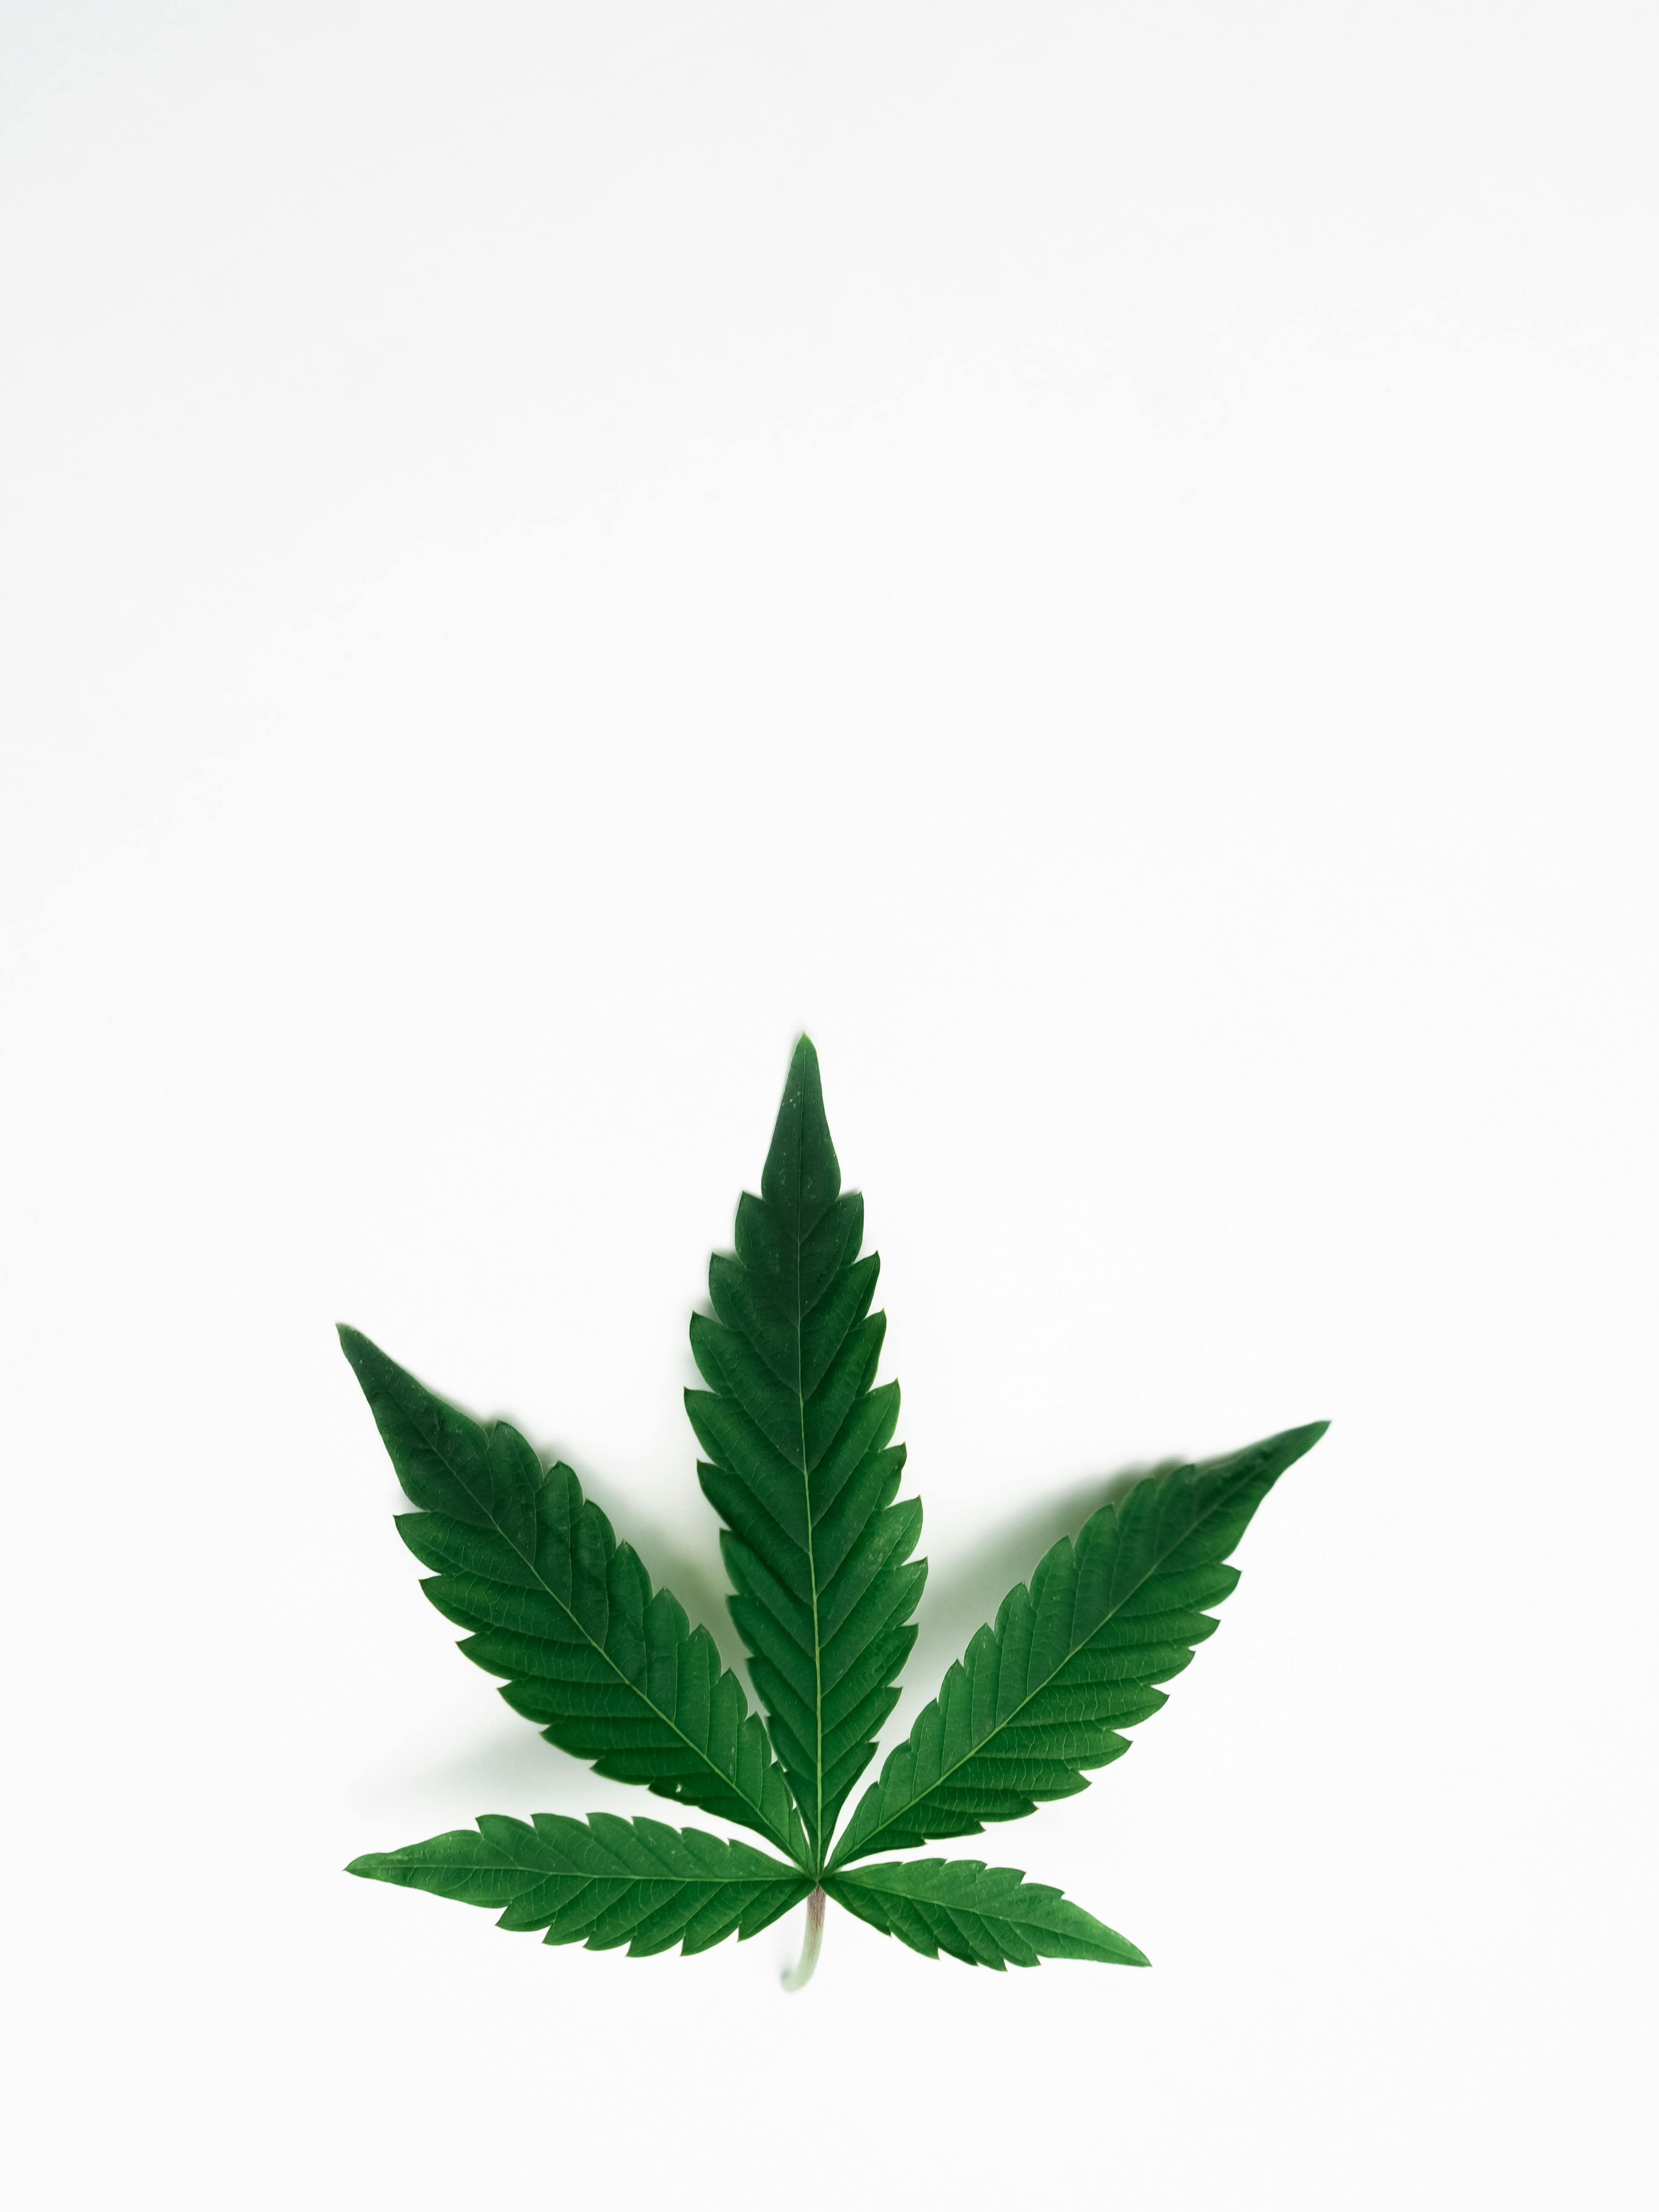 Green Cannabis on round gray scale photo – Free Weed Image on Unsplash